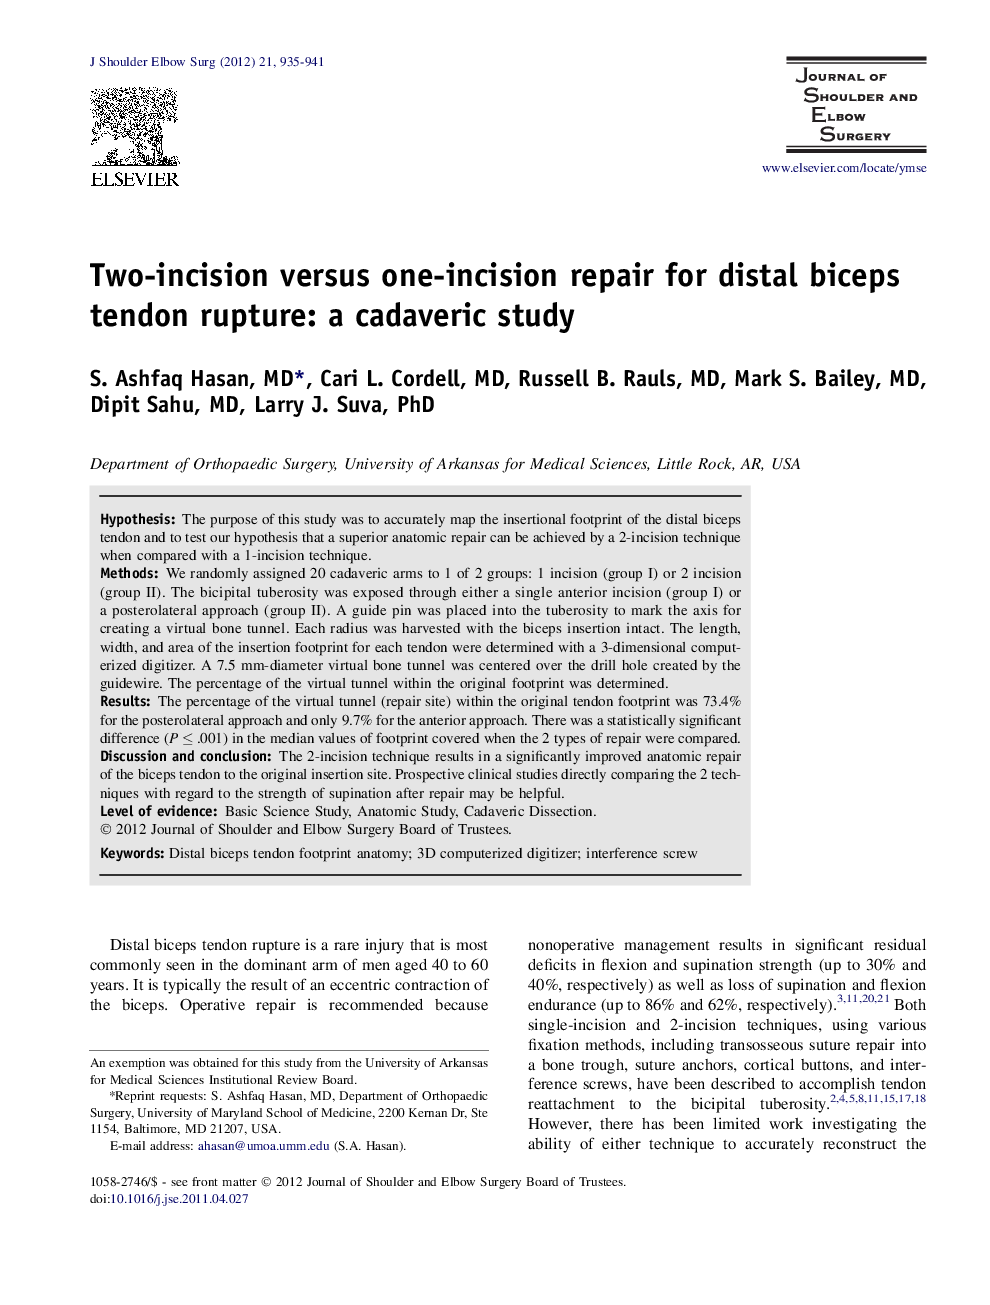 Two-incision versus one-incision repair for distal biceps tendon rupture: a cadaveric study 